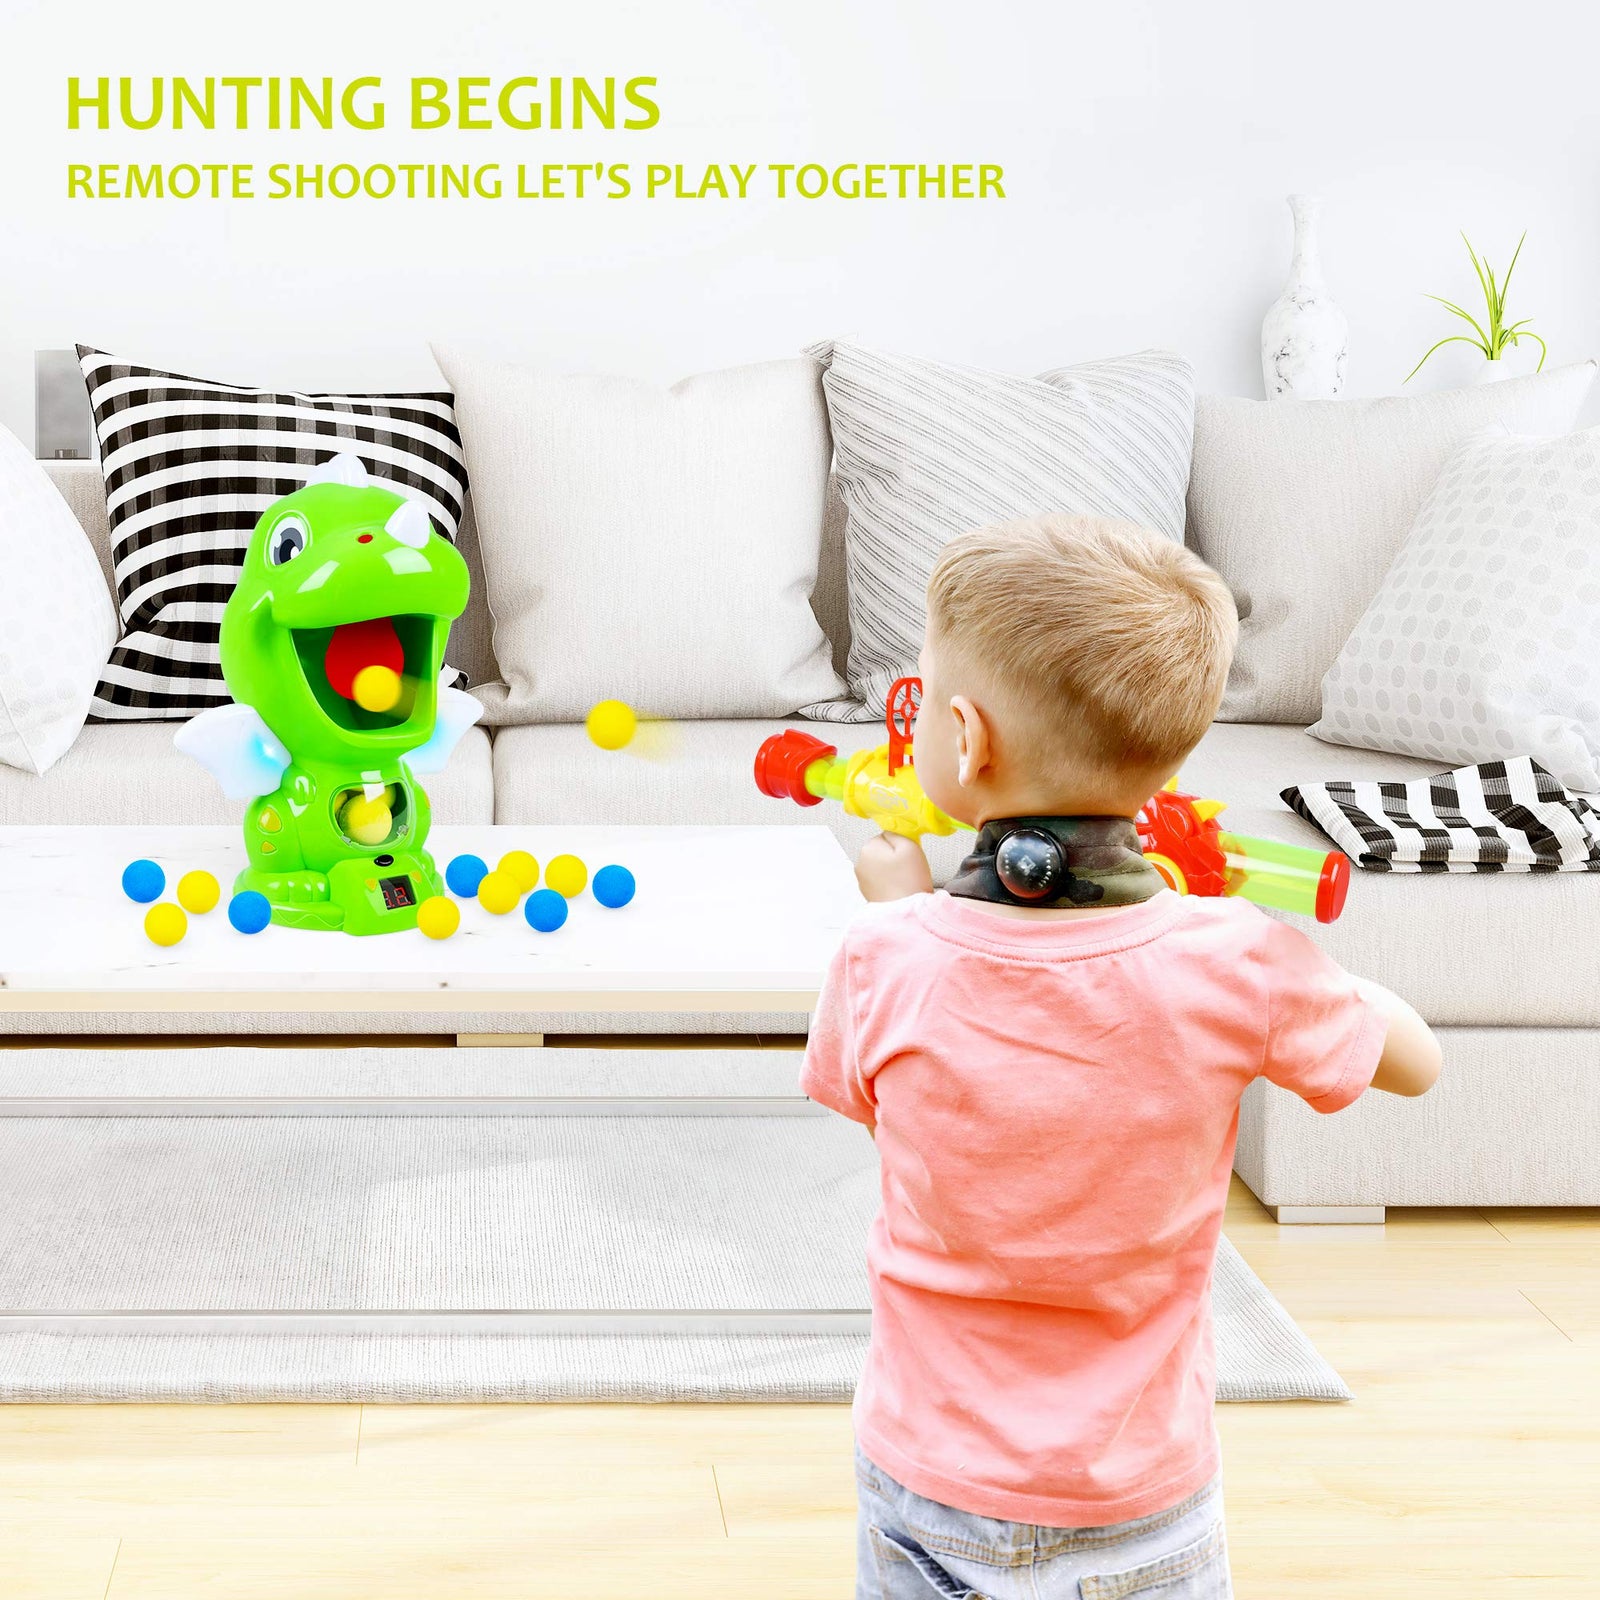 Dinosaur Toys Shooting Target Toy Gun for Kids-Air Pump Shooting Game with 36 Foam Balls,Electronic Target Practice Party Toys with Score Record,Sound and LED,Gifts for 5 6 7 8 9 Years Old Boys Girls